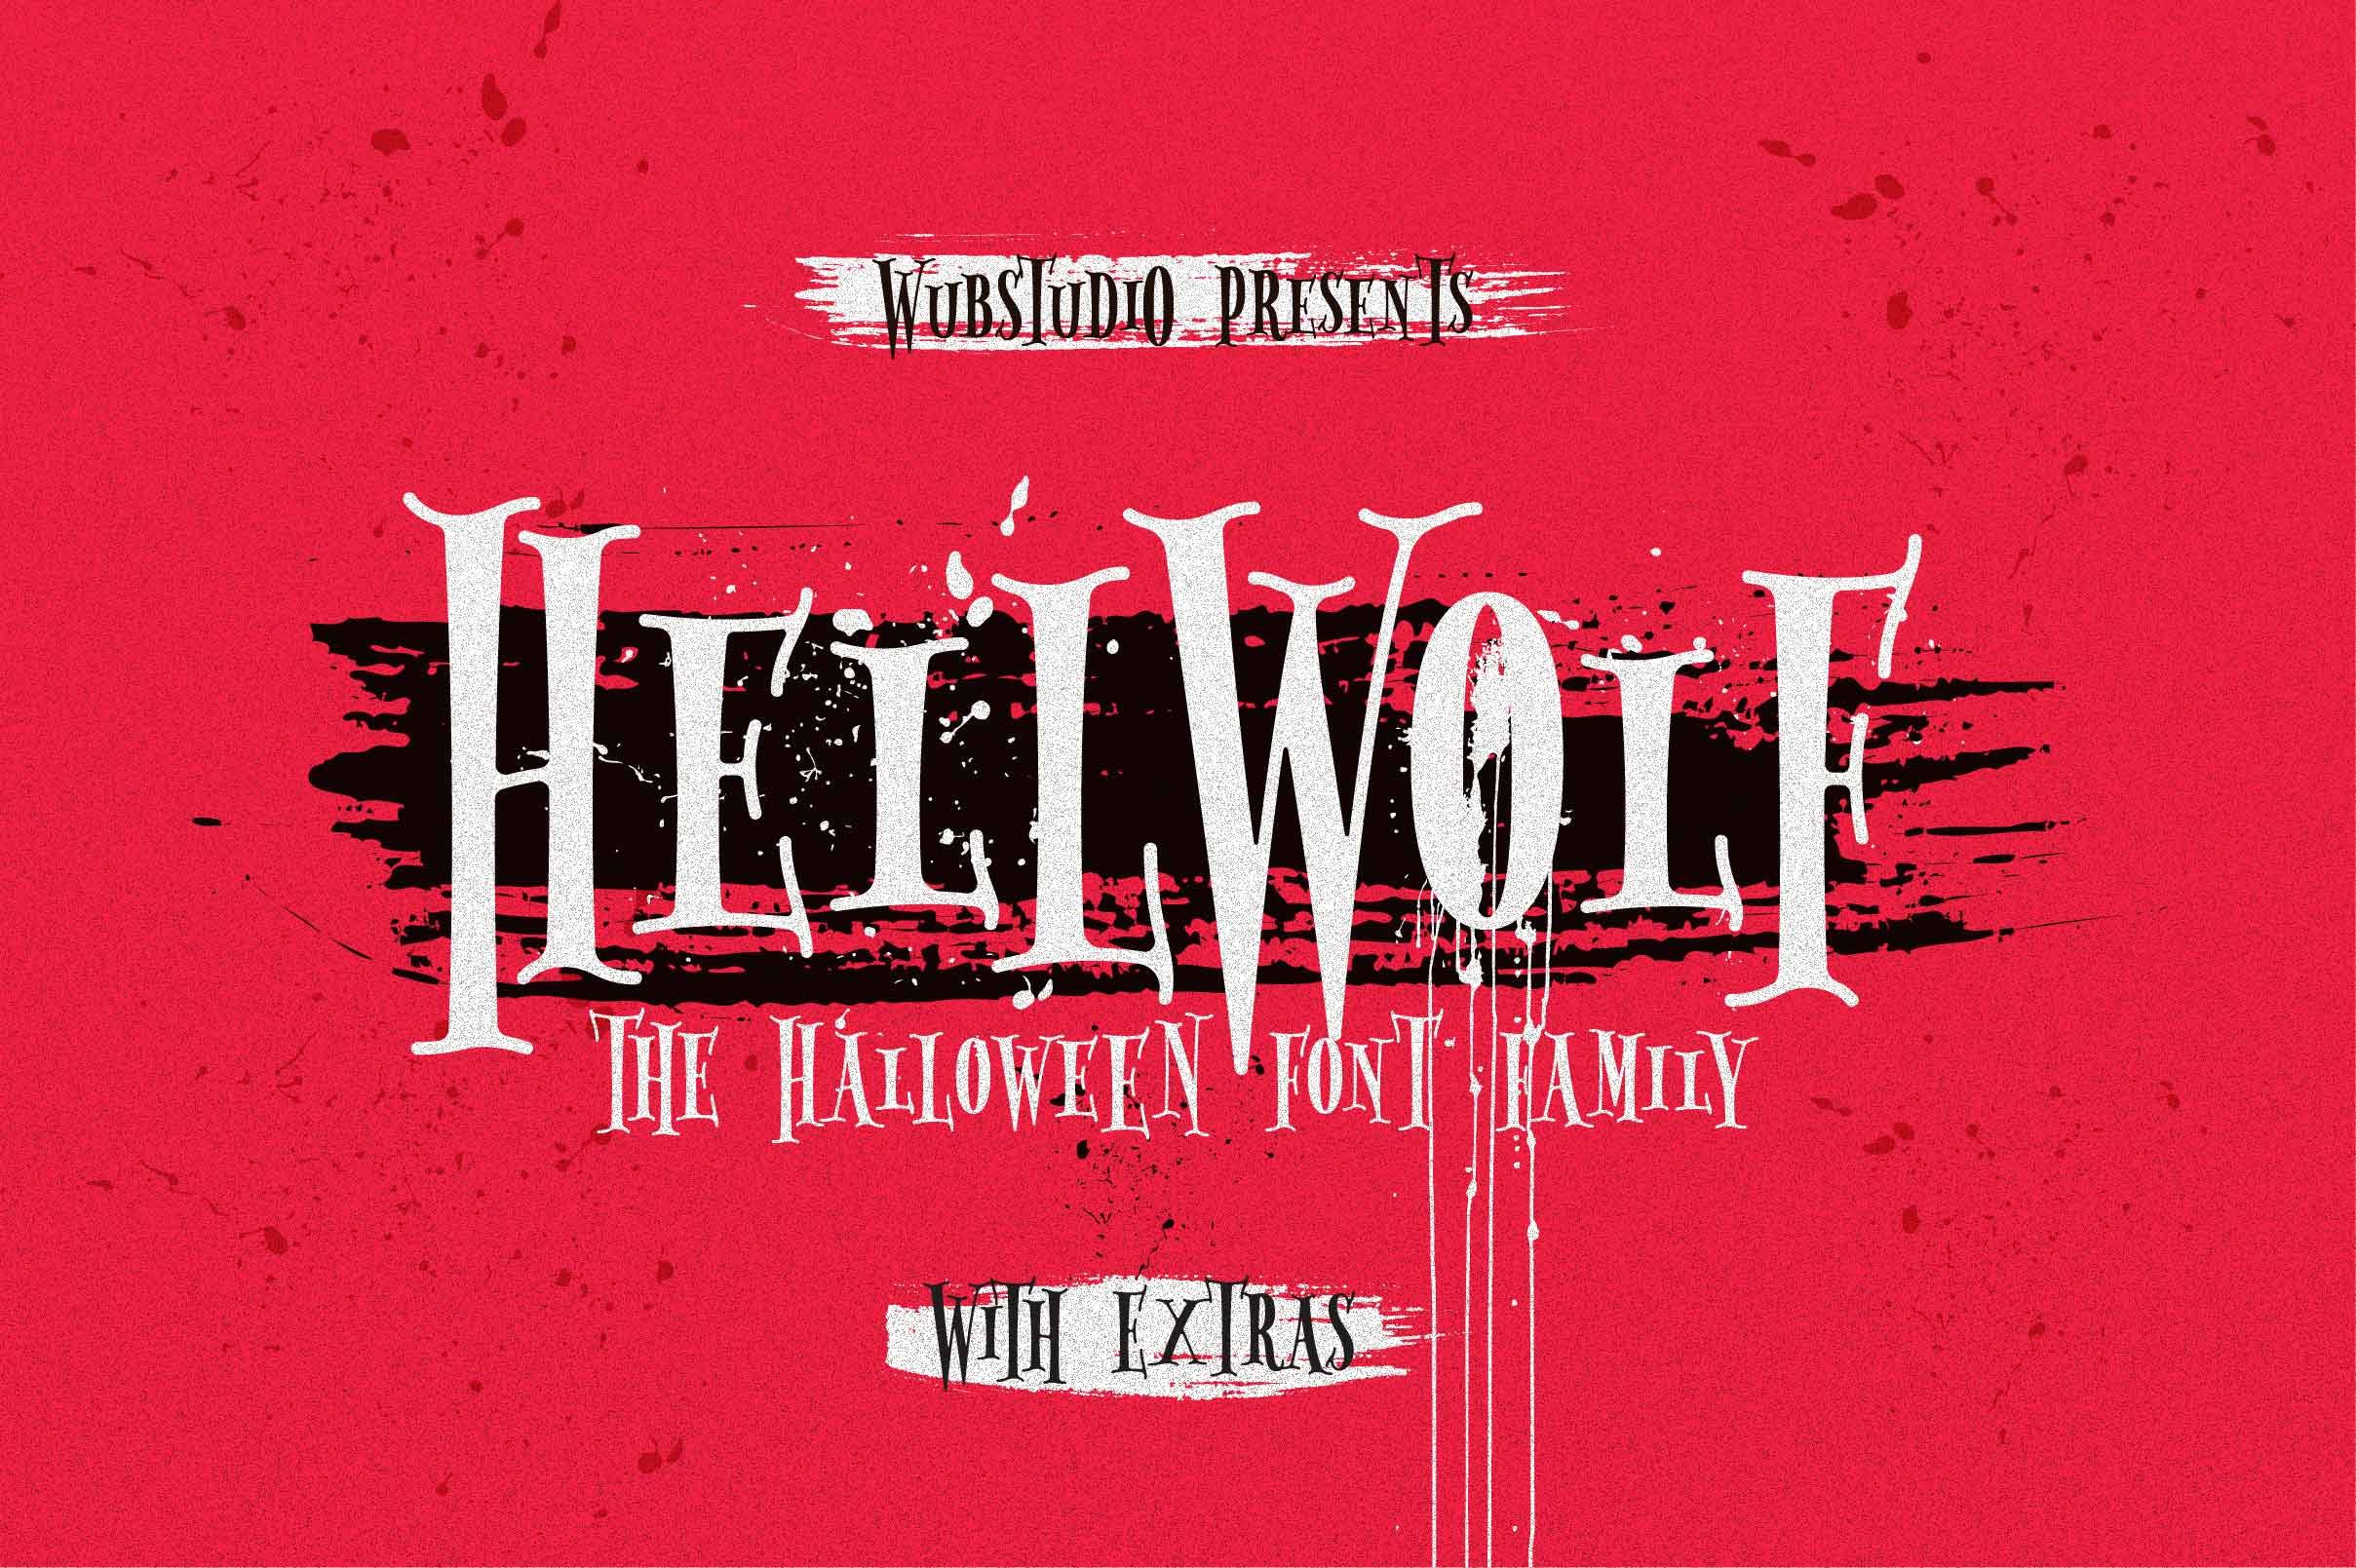 Hellwolf Typeface cover image.